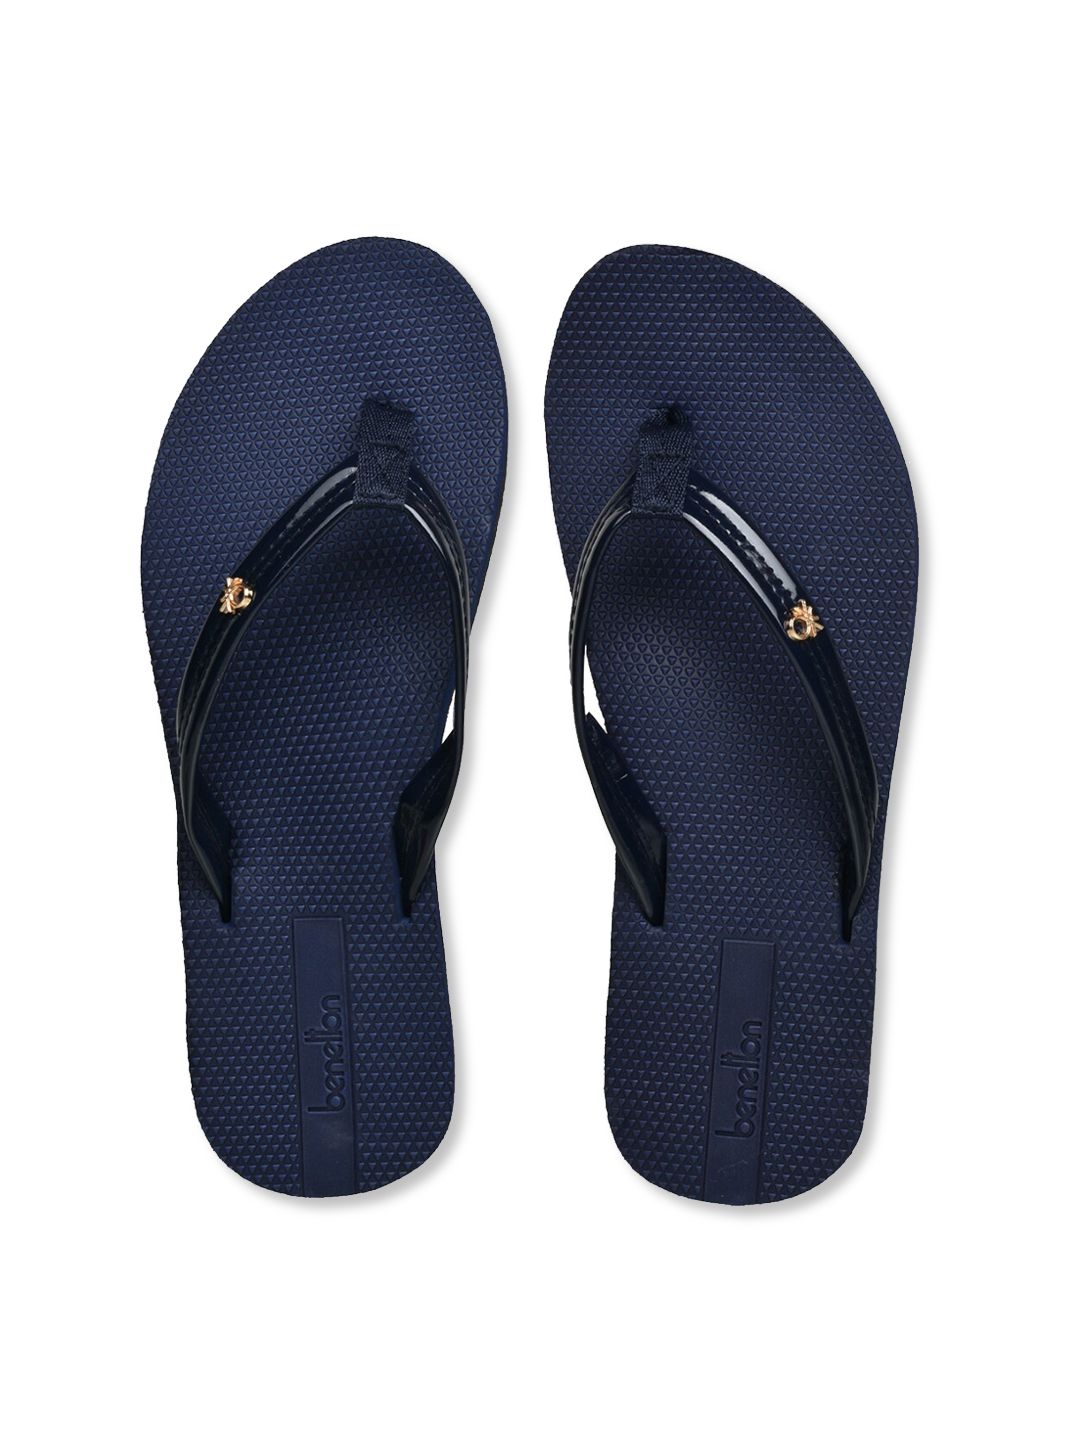 United Colors of Benetton Women Navy Blue & Black Rubber Thong Flip-Flops Price in India